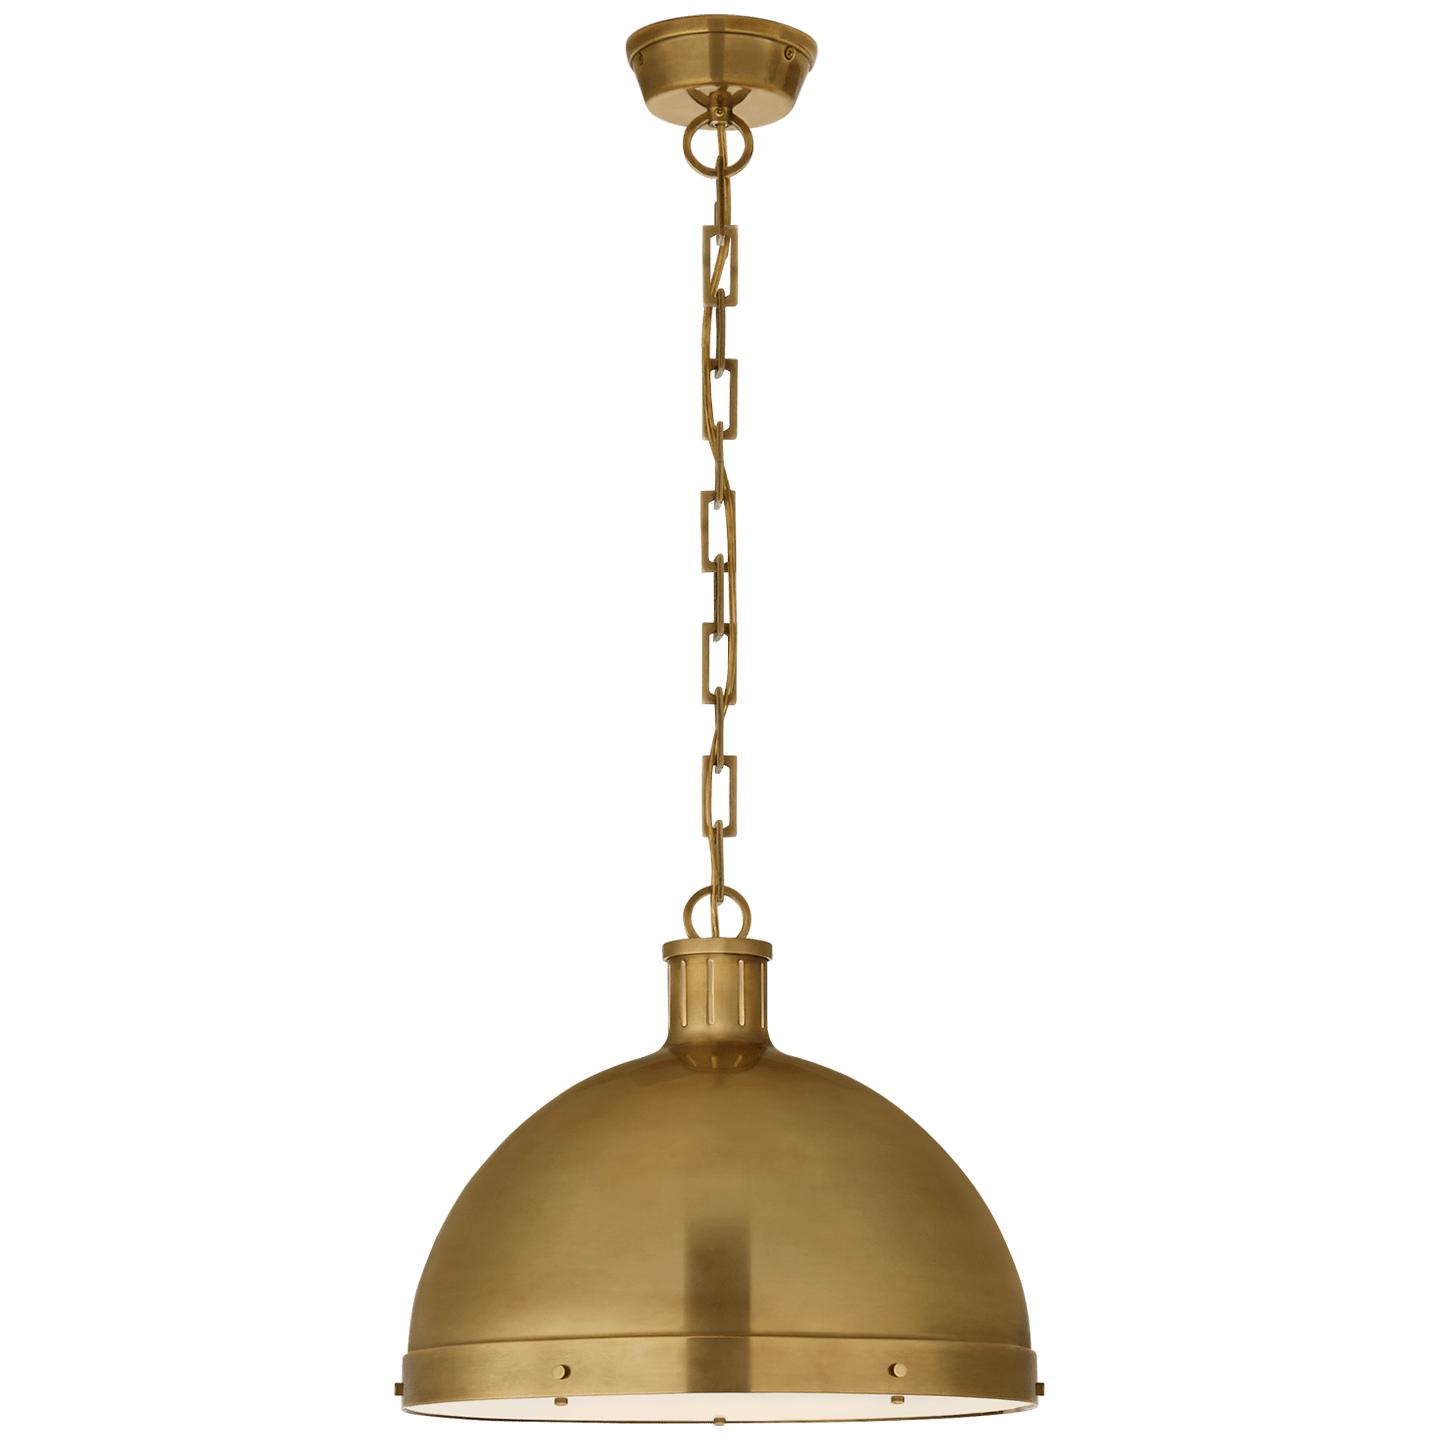 Hand-Rubbed Antique Brass Frosted Acrylic